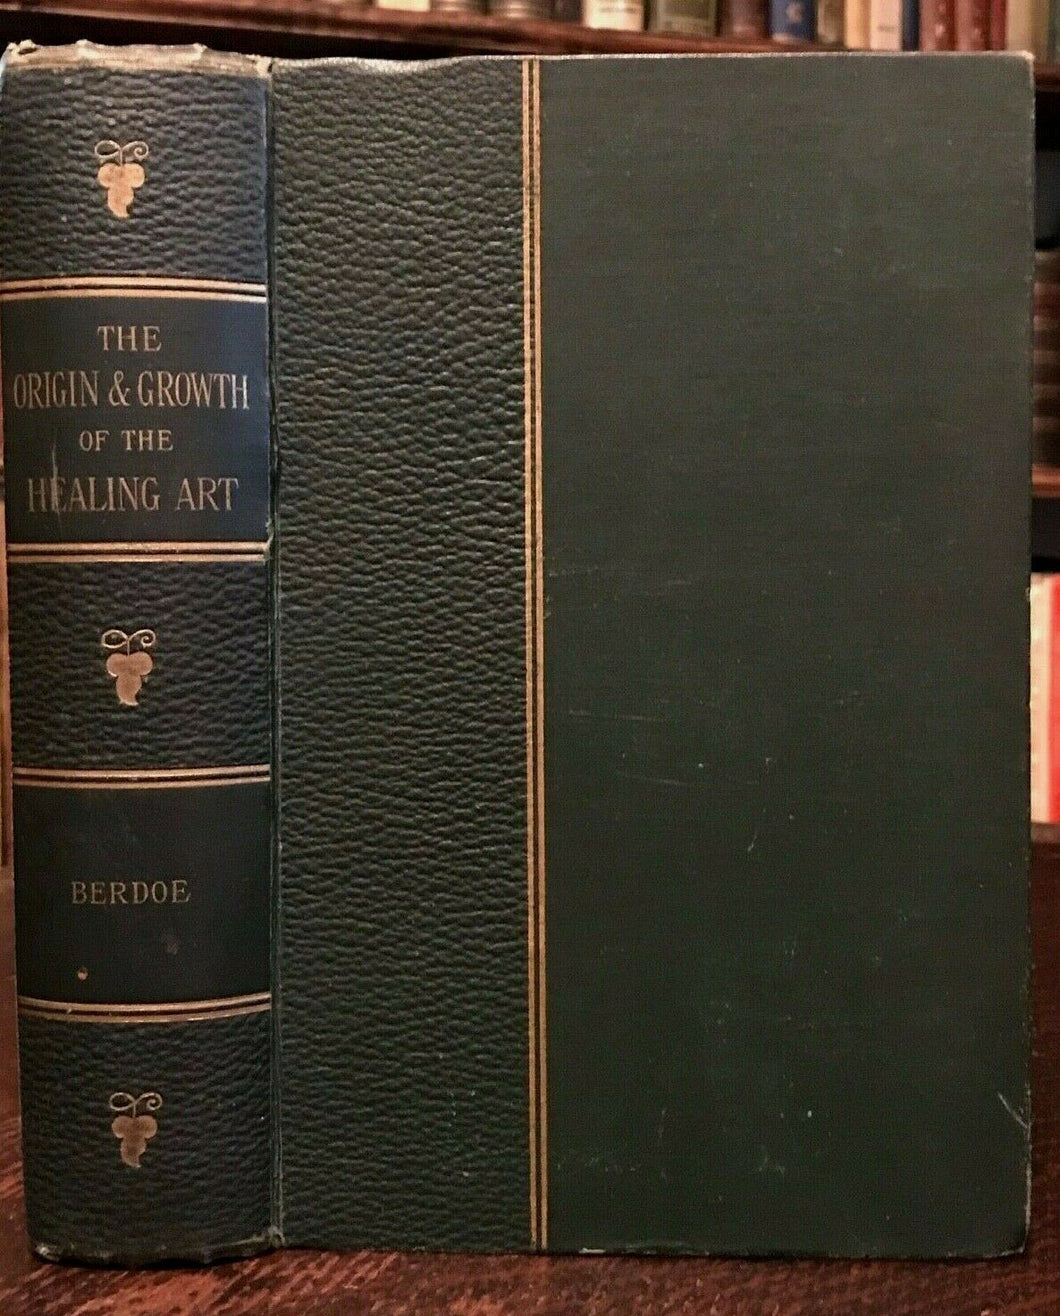 ORIGIN AND GROWTH OF THE HEALING ART - 1st Ed, 1893 - WITCHCRAFT MYTH MEDICINE